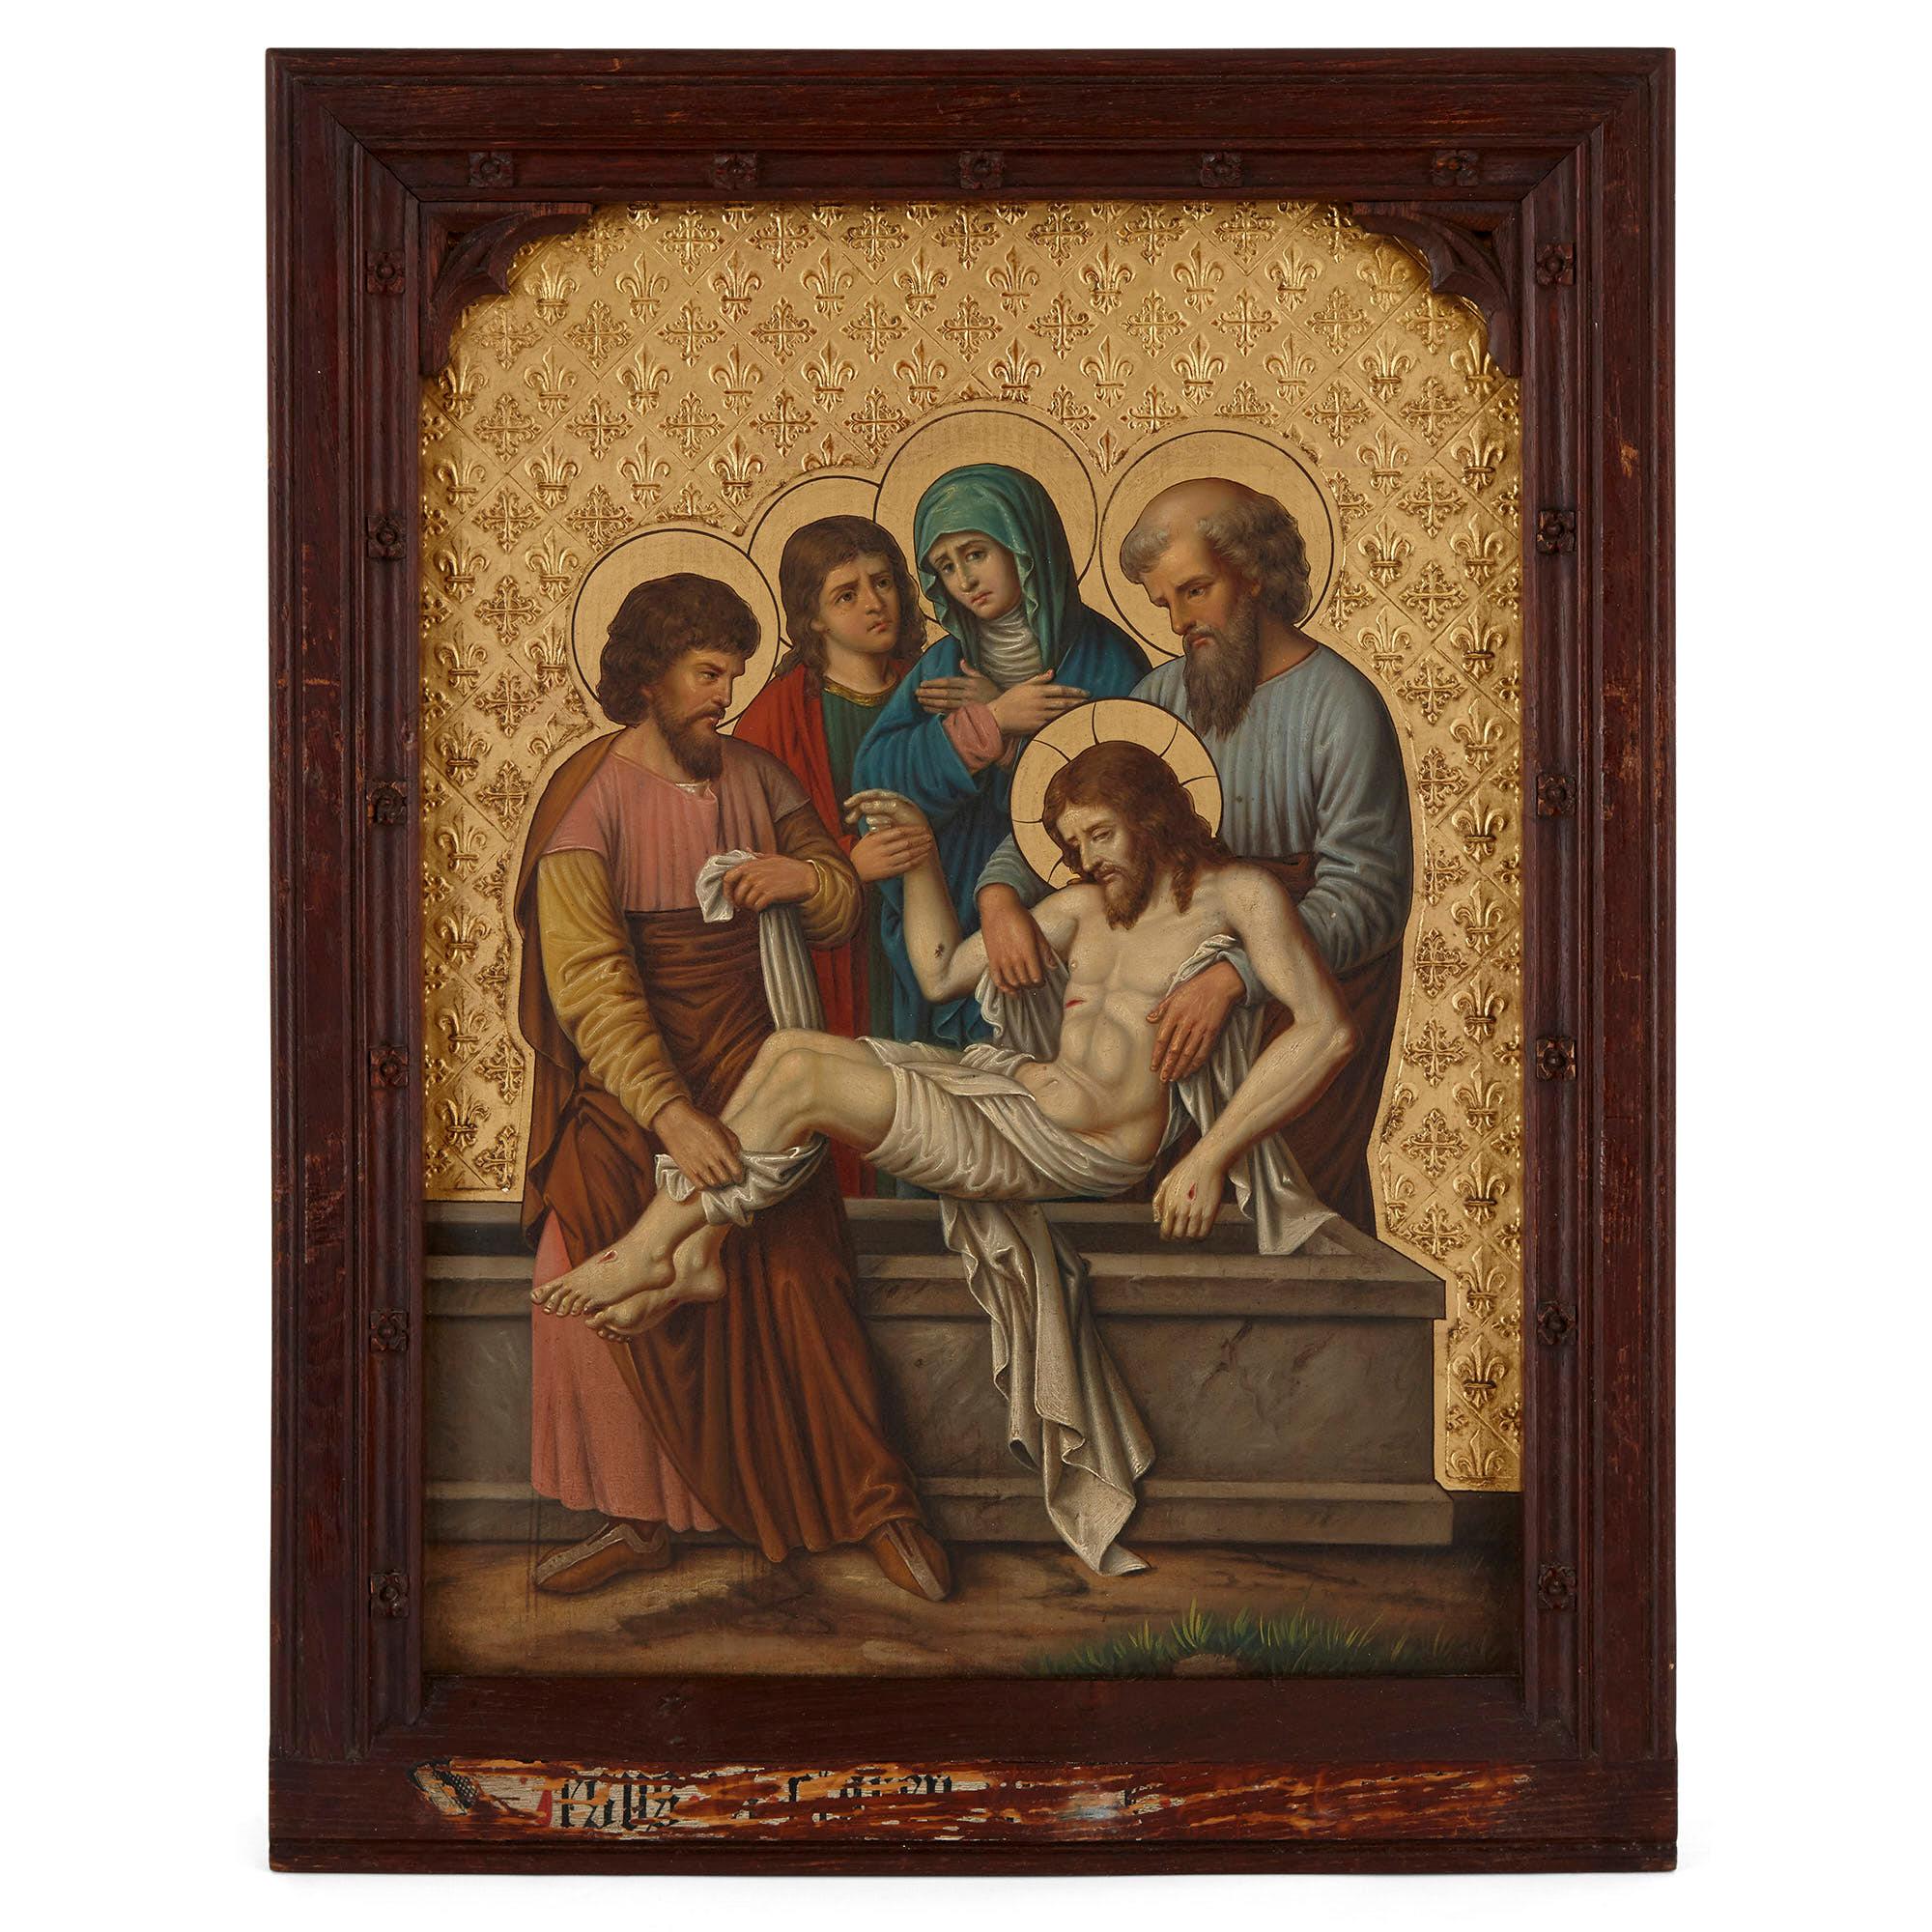 Set of four paintings of Christ drawn from the Stations of the Cross - Brown Figurative Painting by Unknown